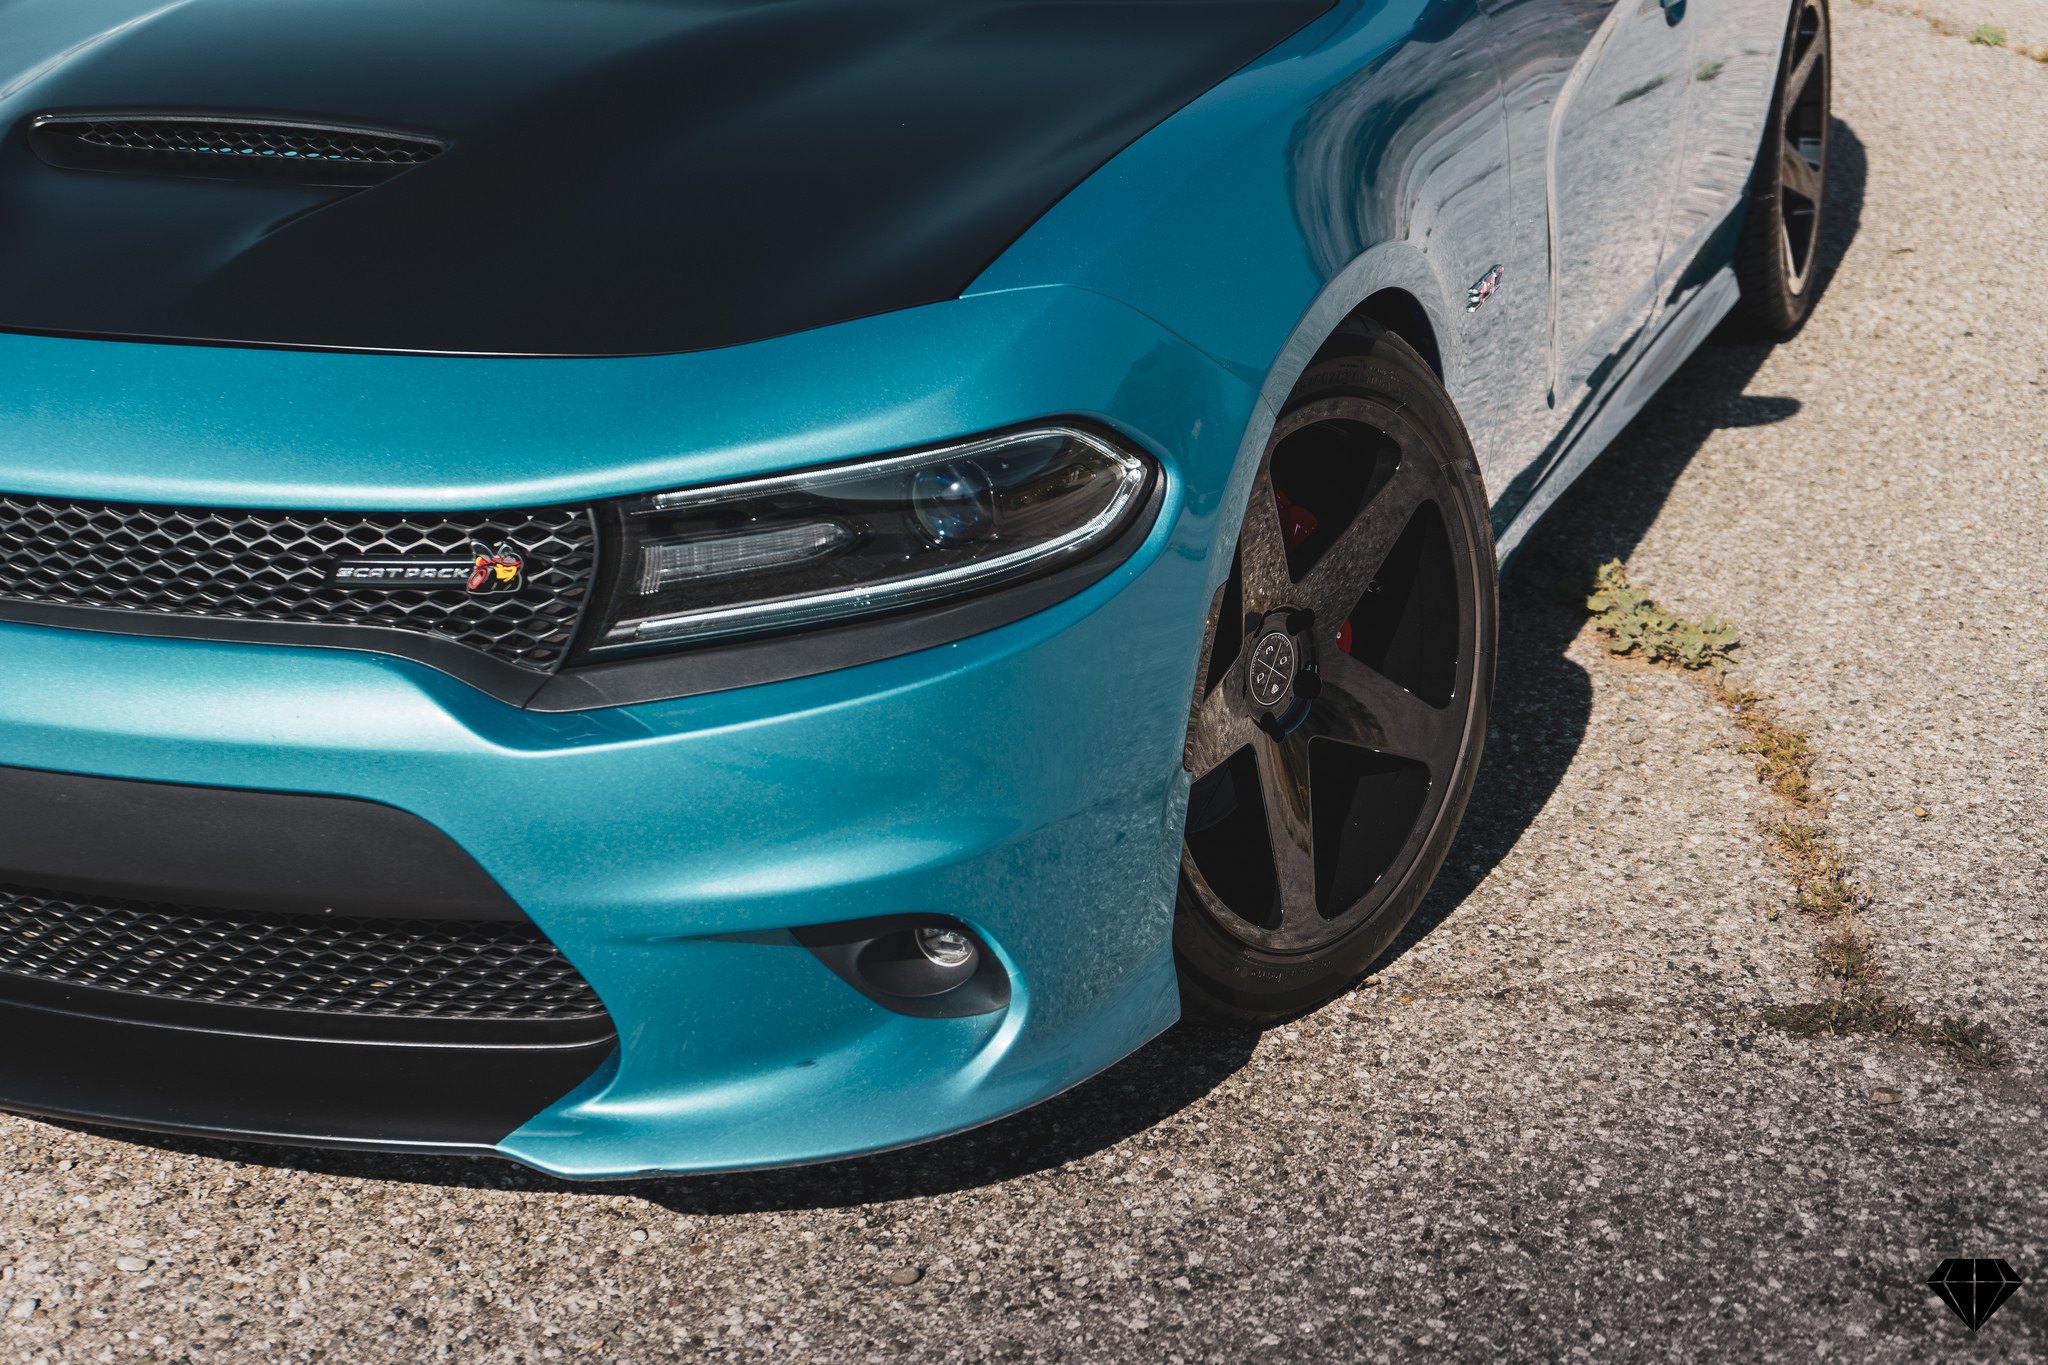 Blacked Out Mesh Grille on Turquoise Dodge Charger - Photo by Blaque Diamond Wheels